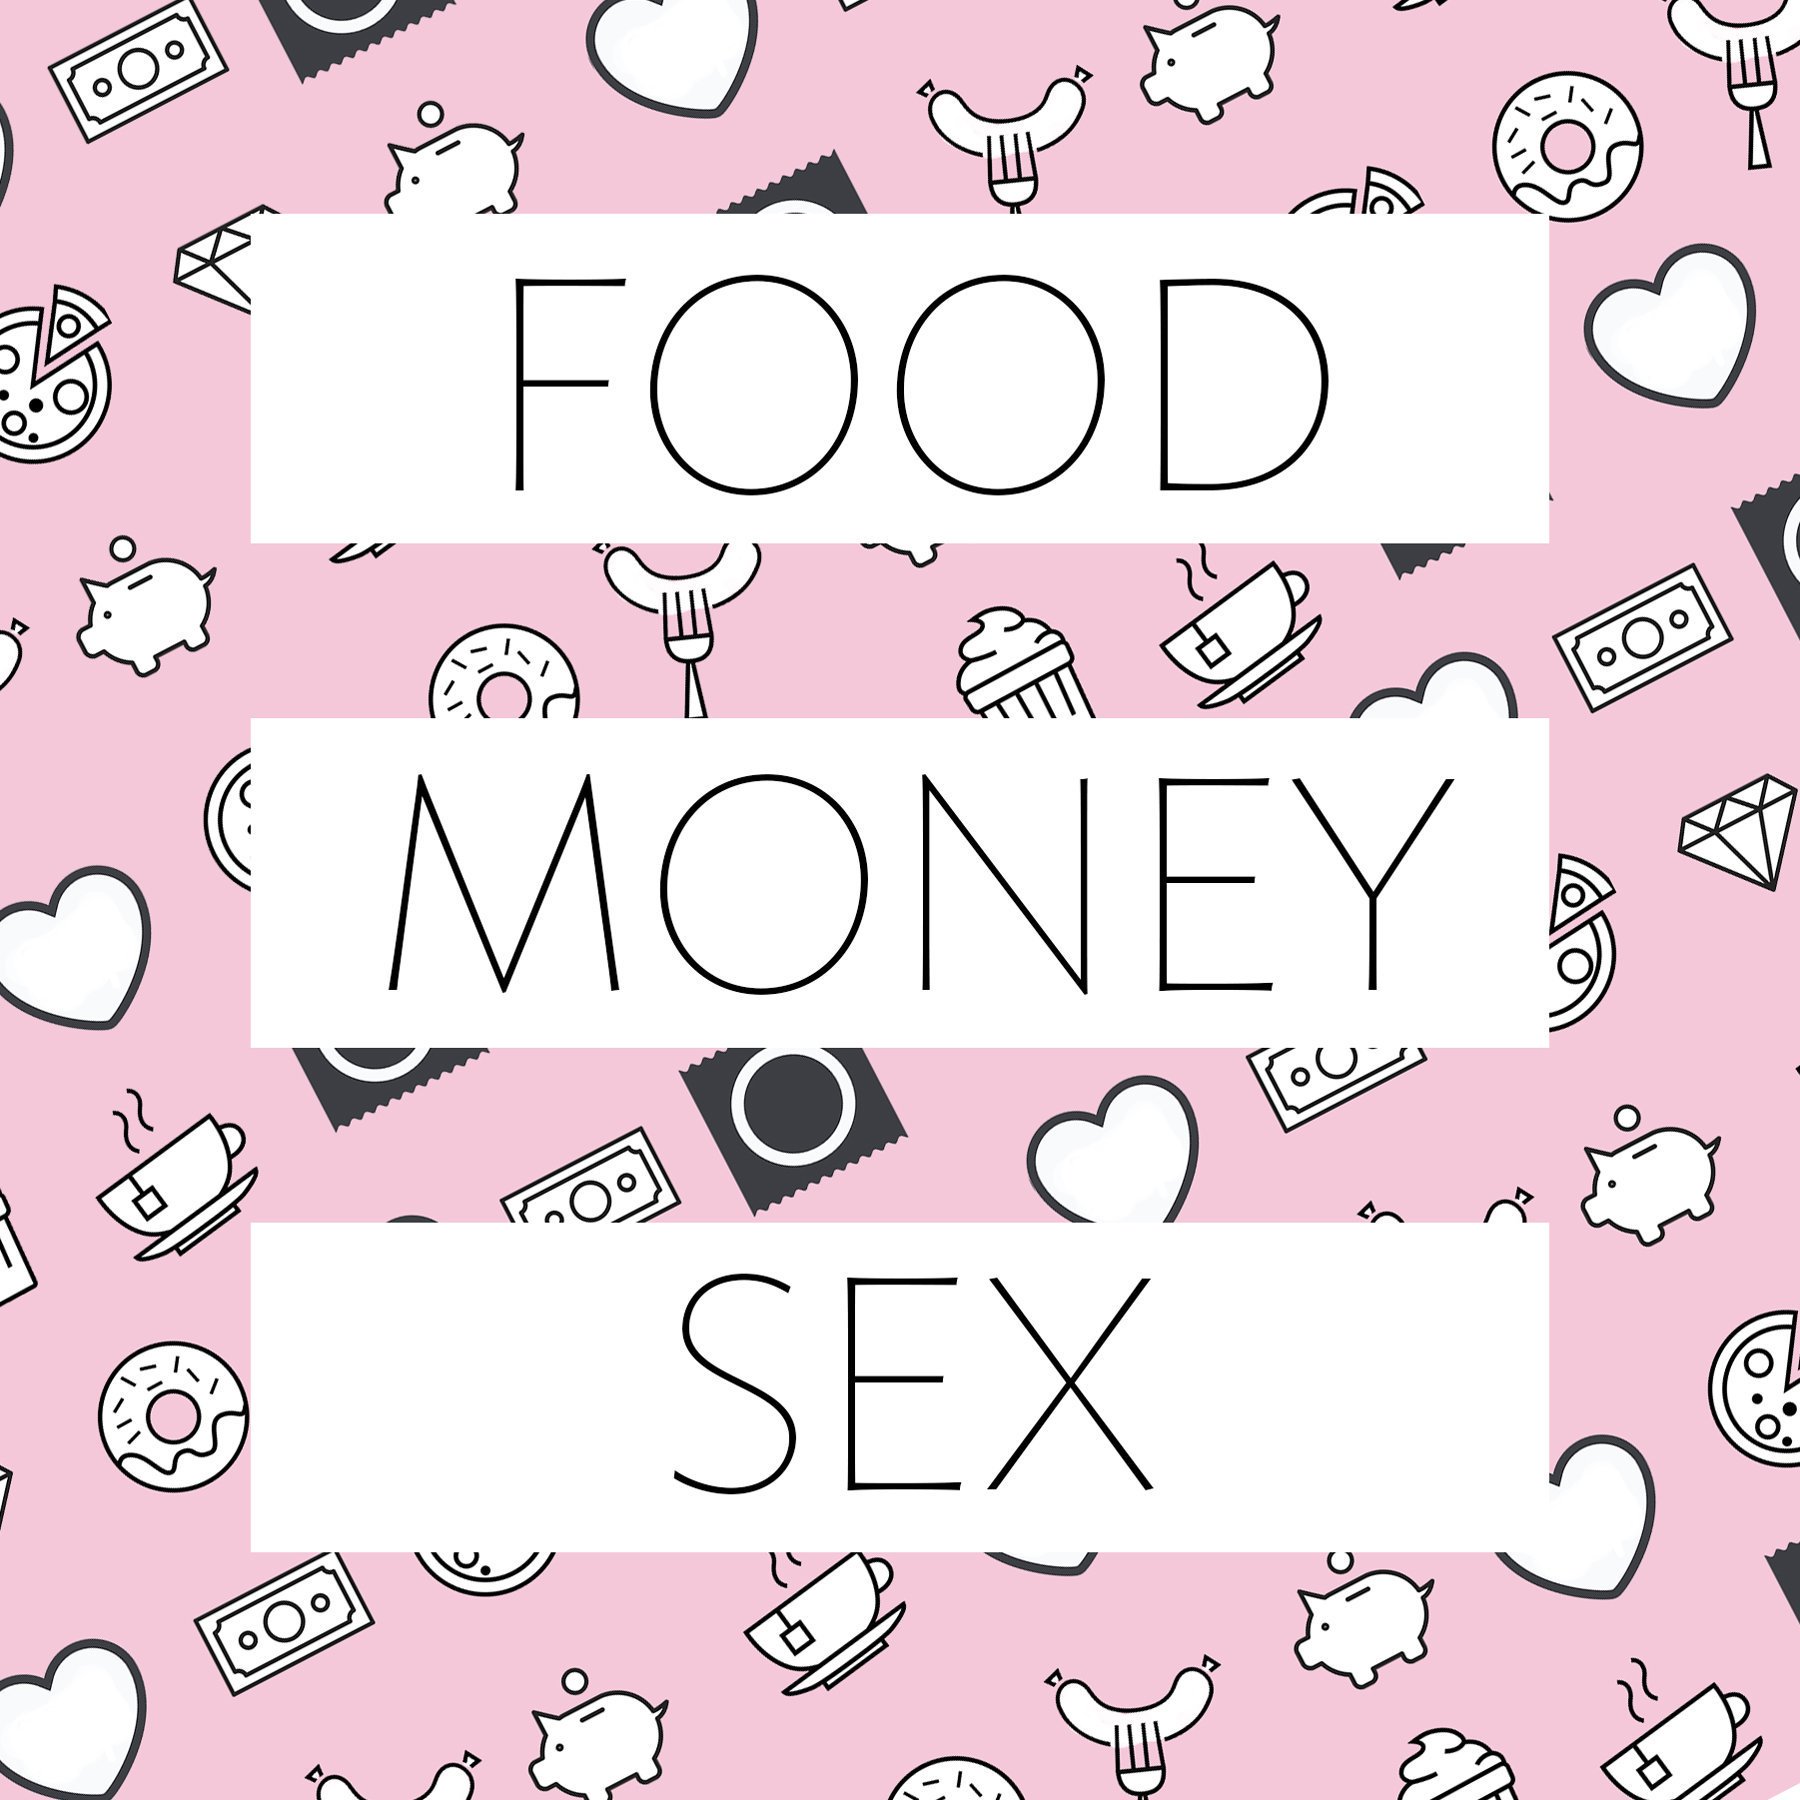 Food Money Sex A Married Couple Who Leave the Kids With the Grandparents and Take a Ton of Edibles image image